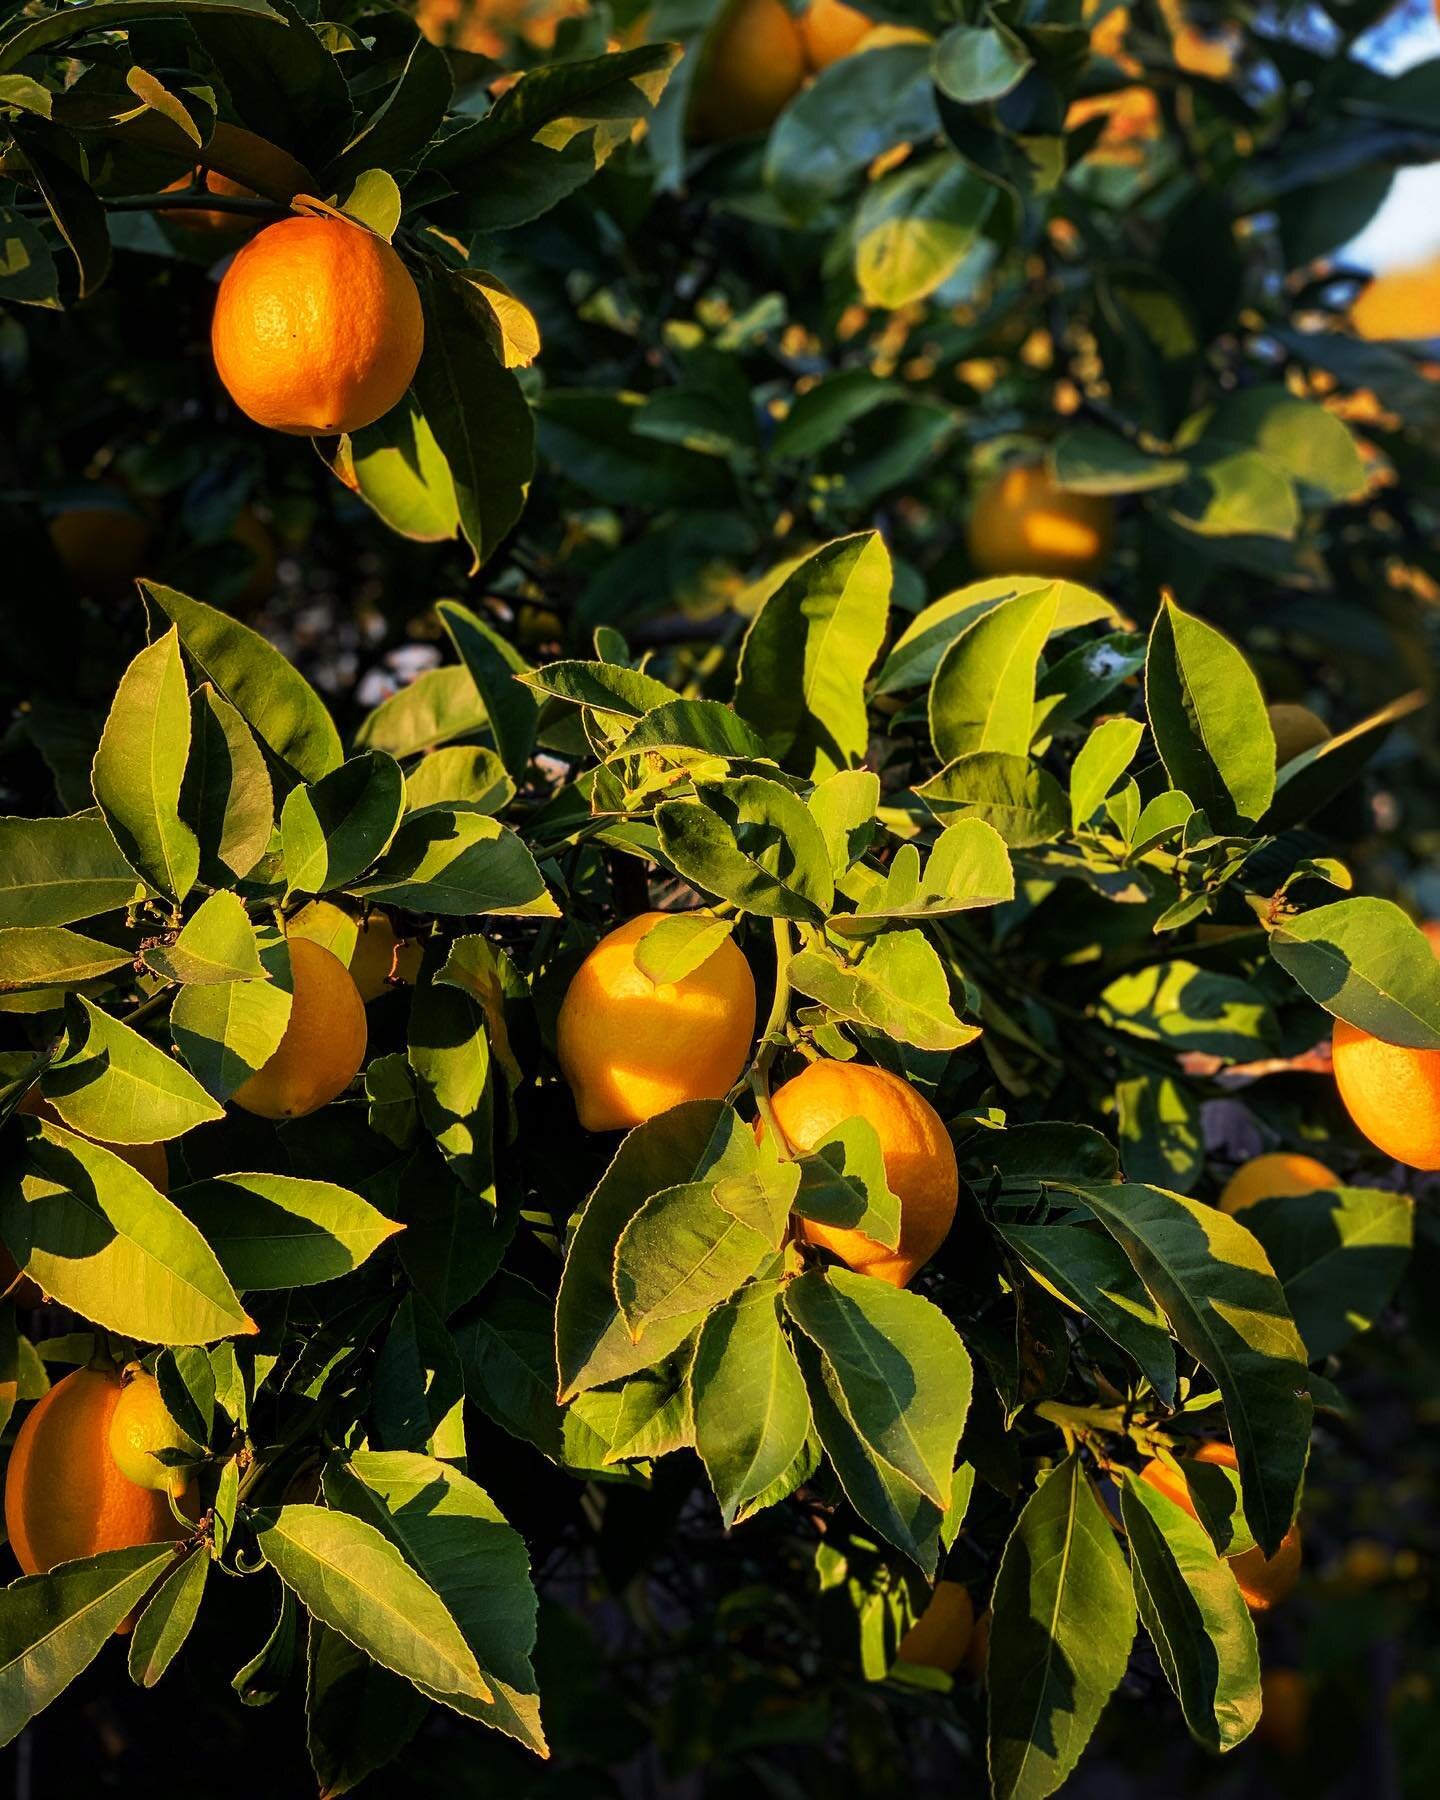 When in doubt about the sanity of making a home in California, winter citrus can really help the case